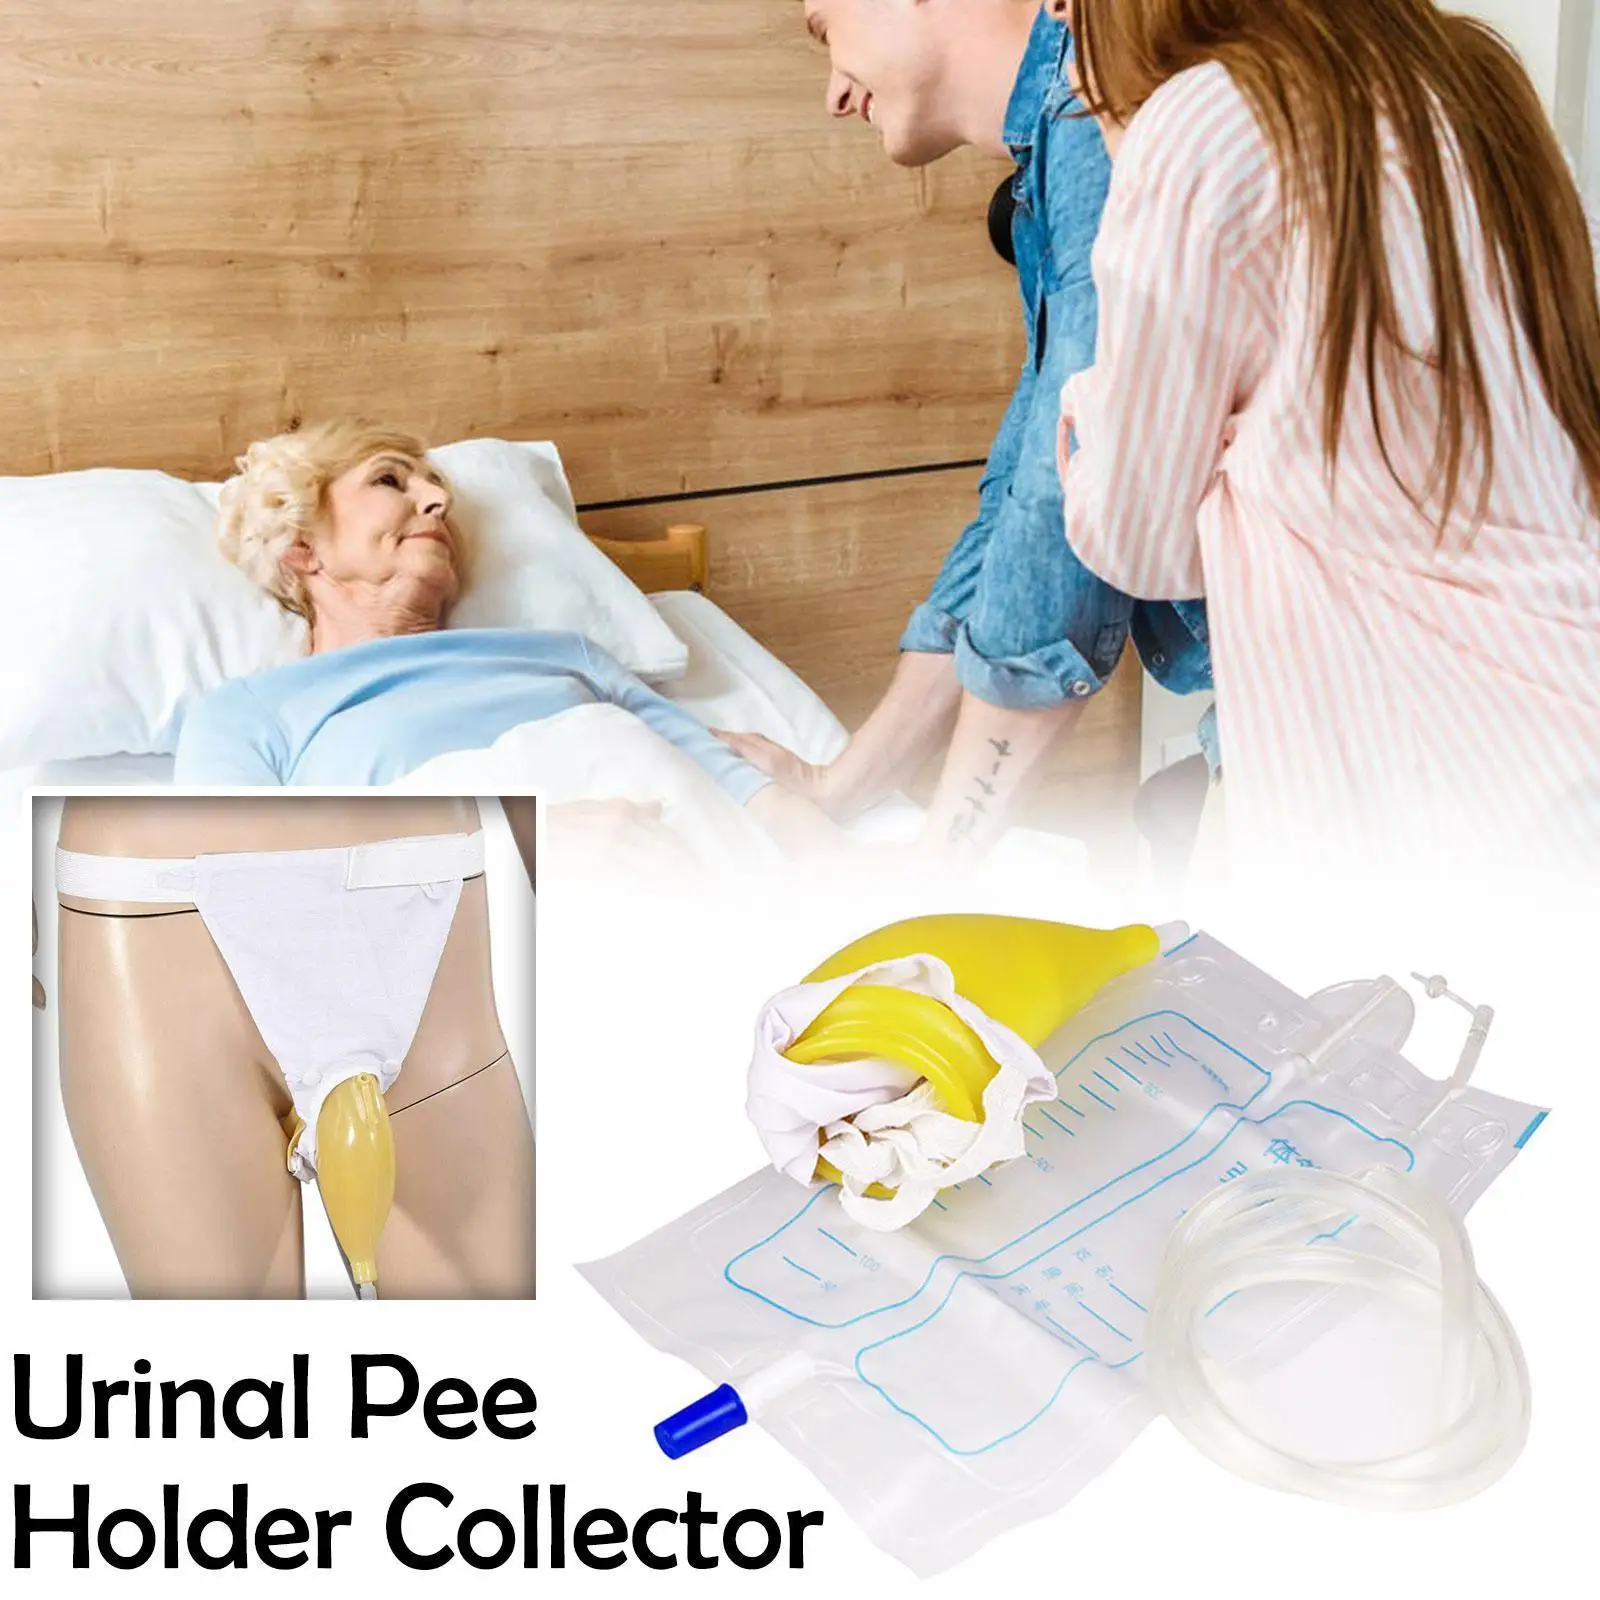 

1000ml Urinal Pee Holder Collector Reusable Male Female Urine Bag For Urinary Incontinence For Traveling Camping M2I3